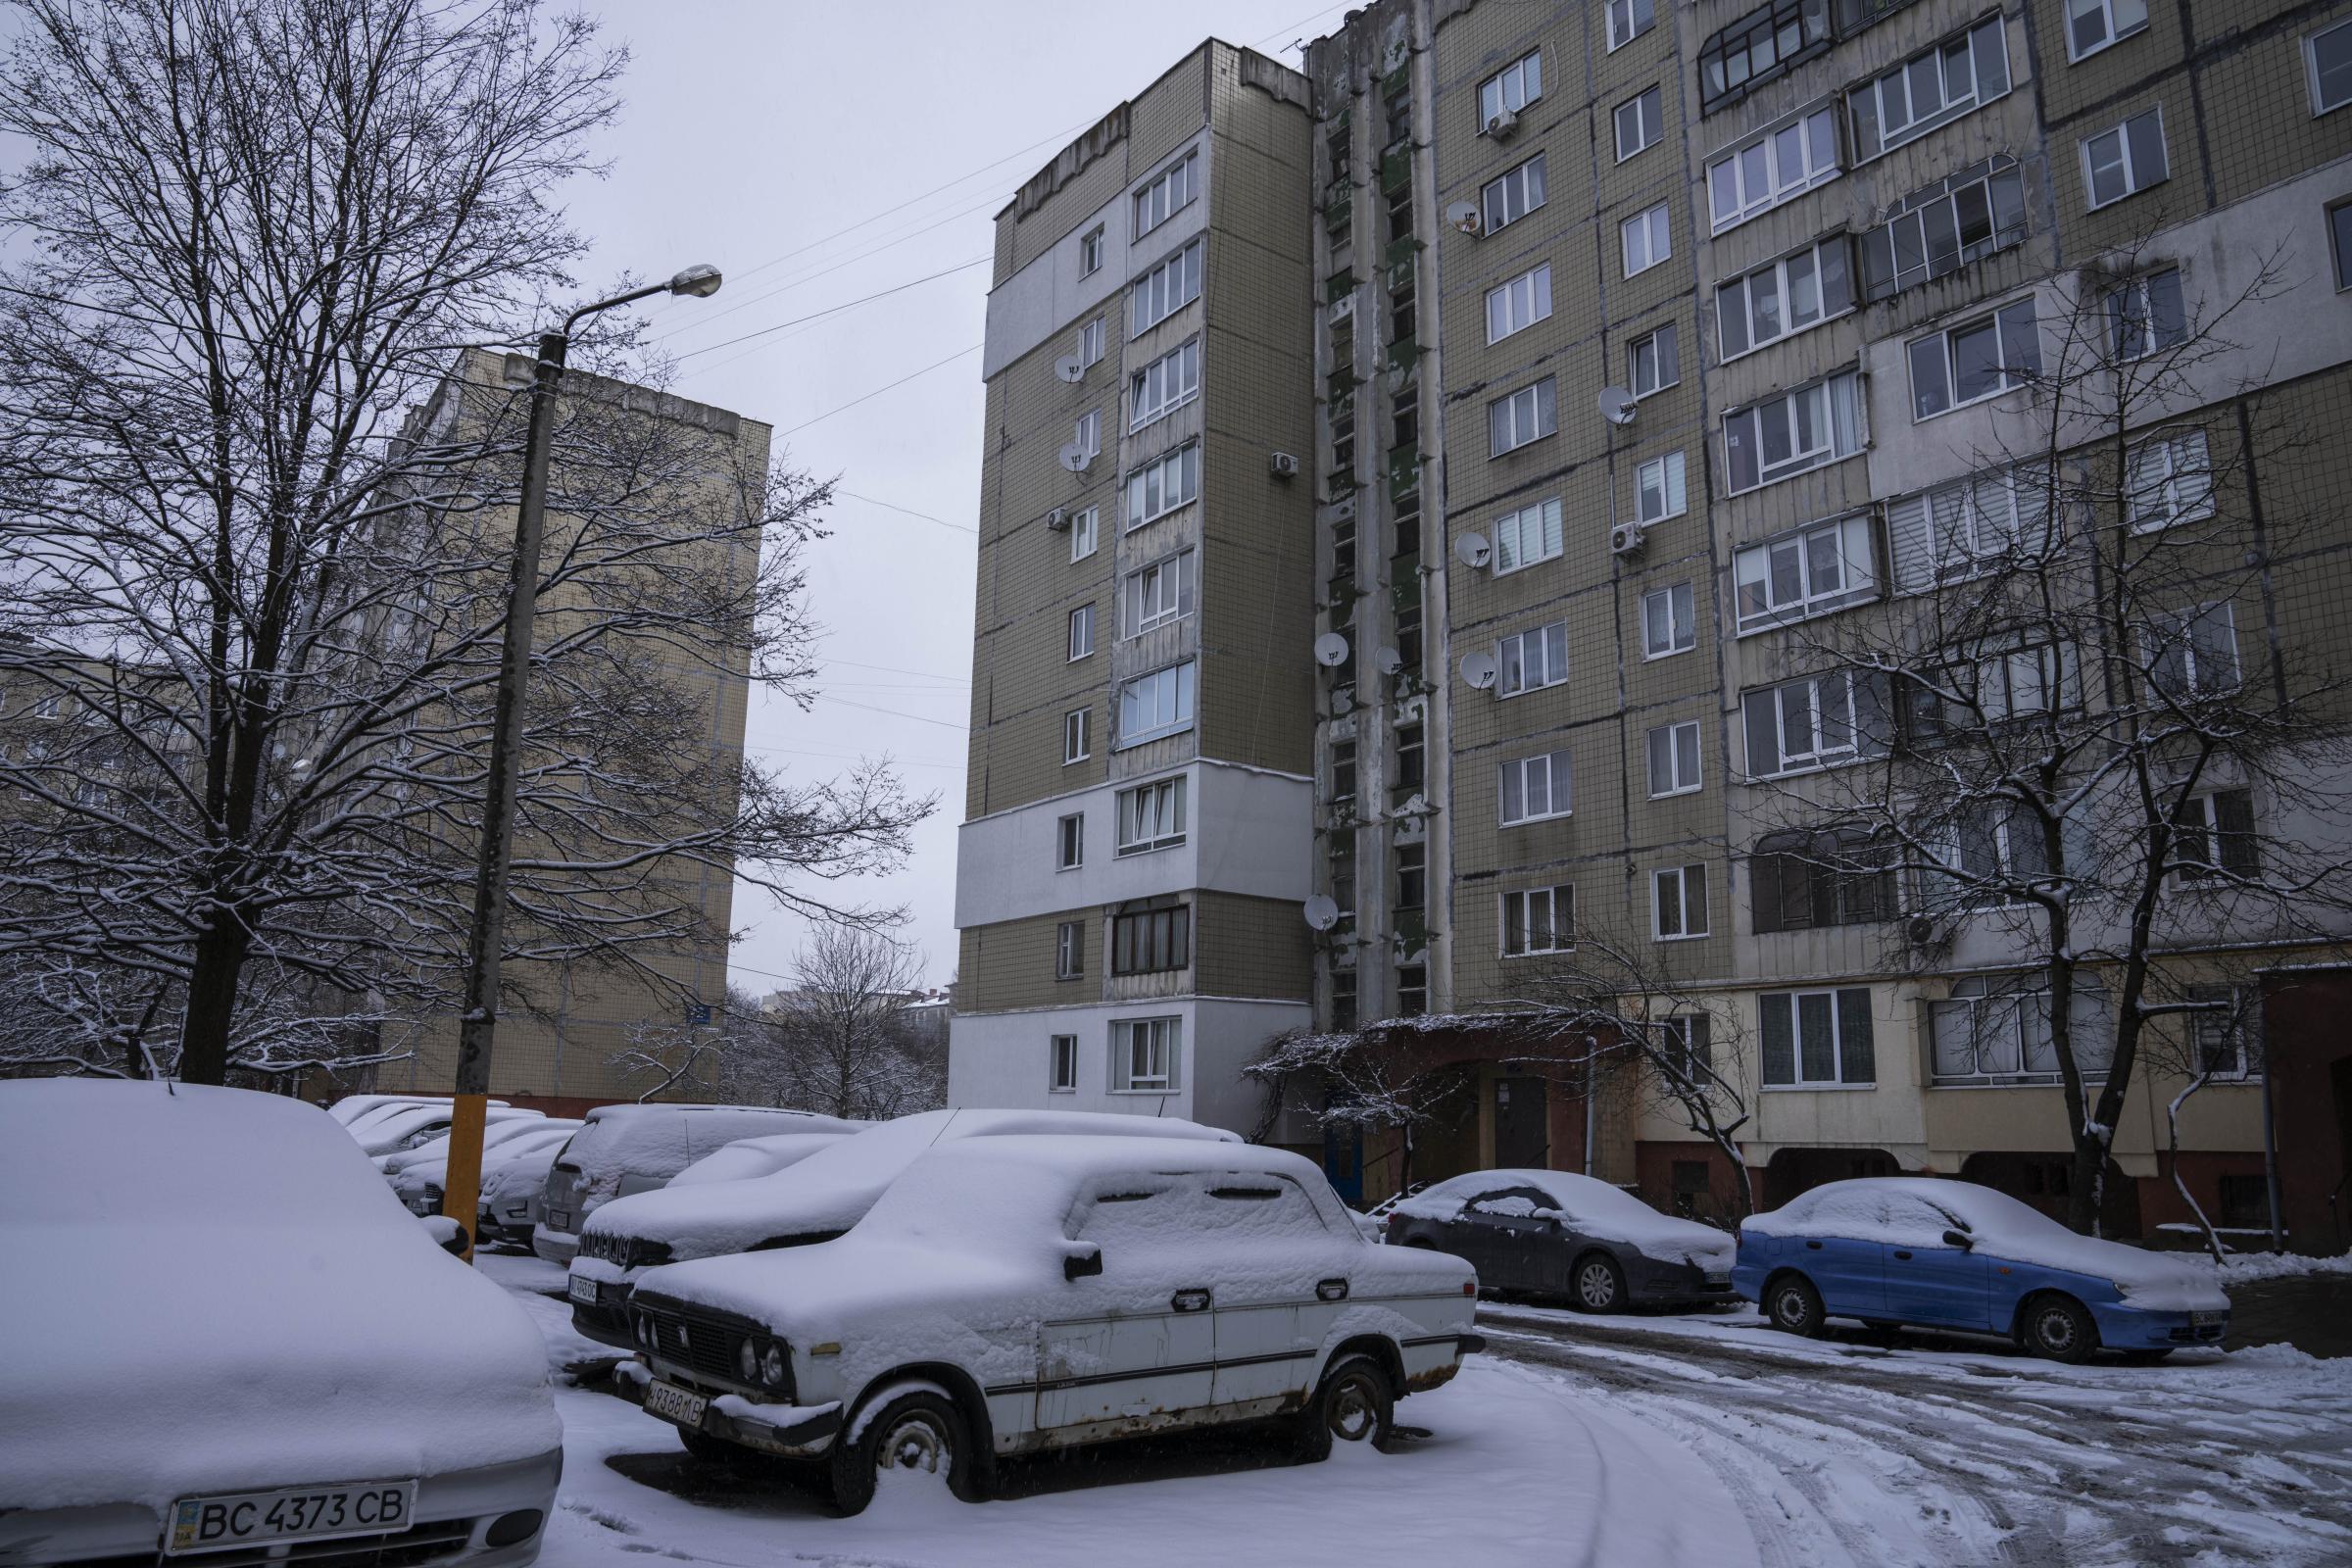 Stories of Ukraine's families during war - Apartment buildings where families fleeing war live.